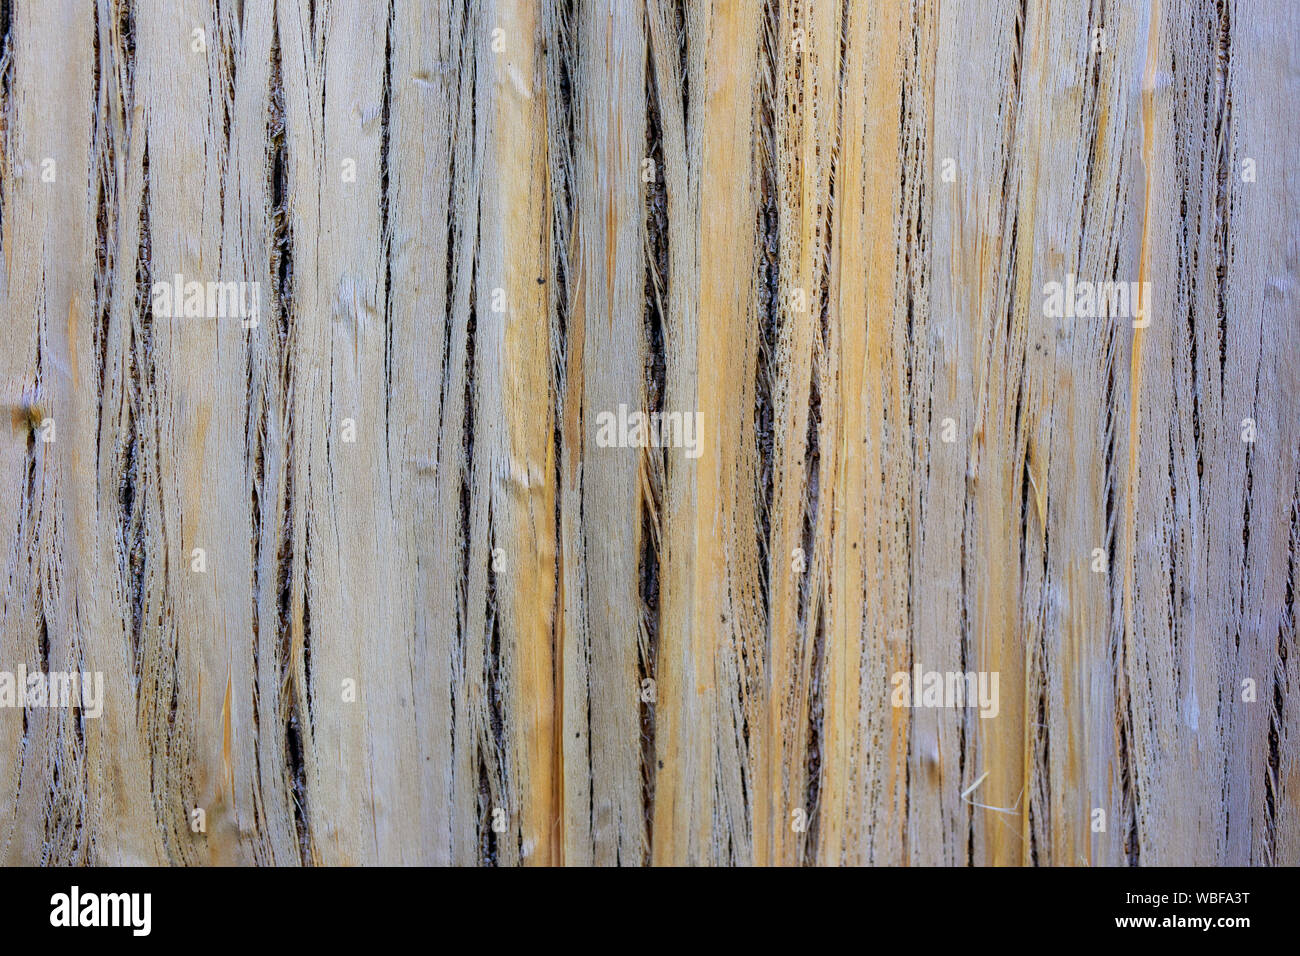 Backdrop texture of chopped or chipped wood cut, crack, break. cracked wooden structure background Stock Photo